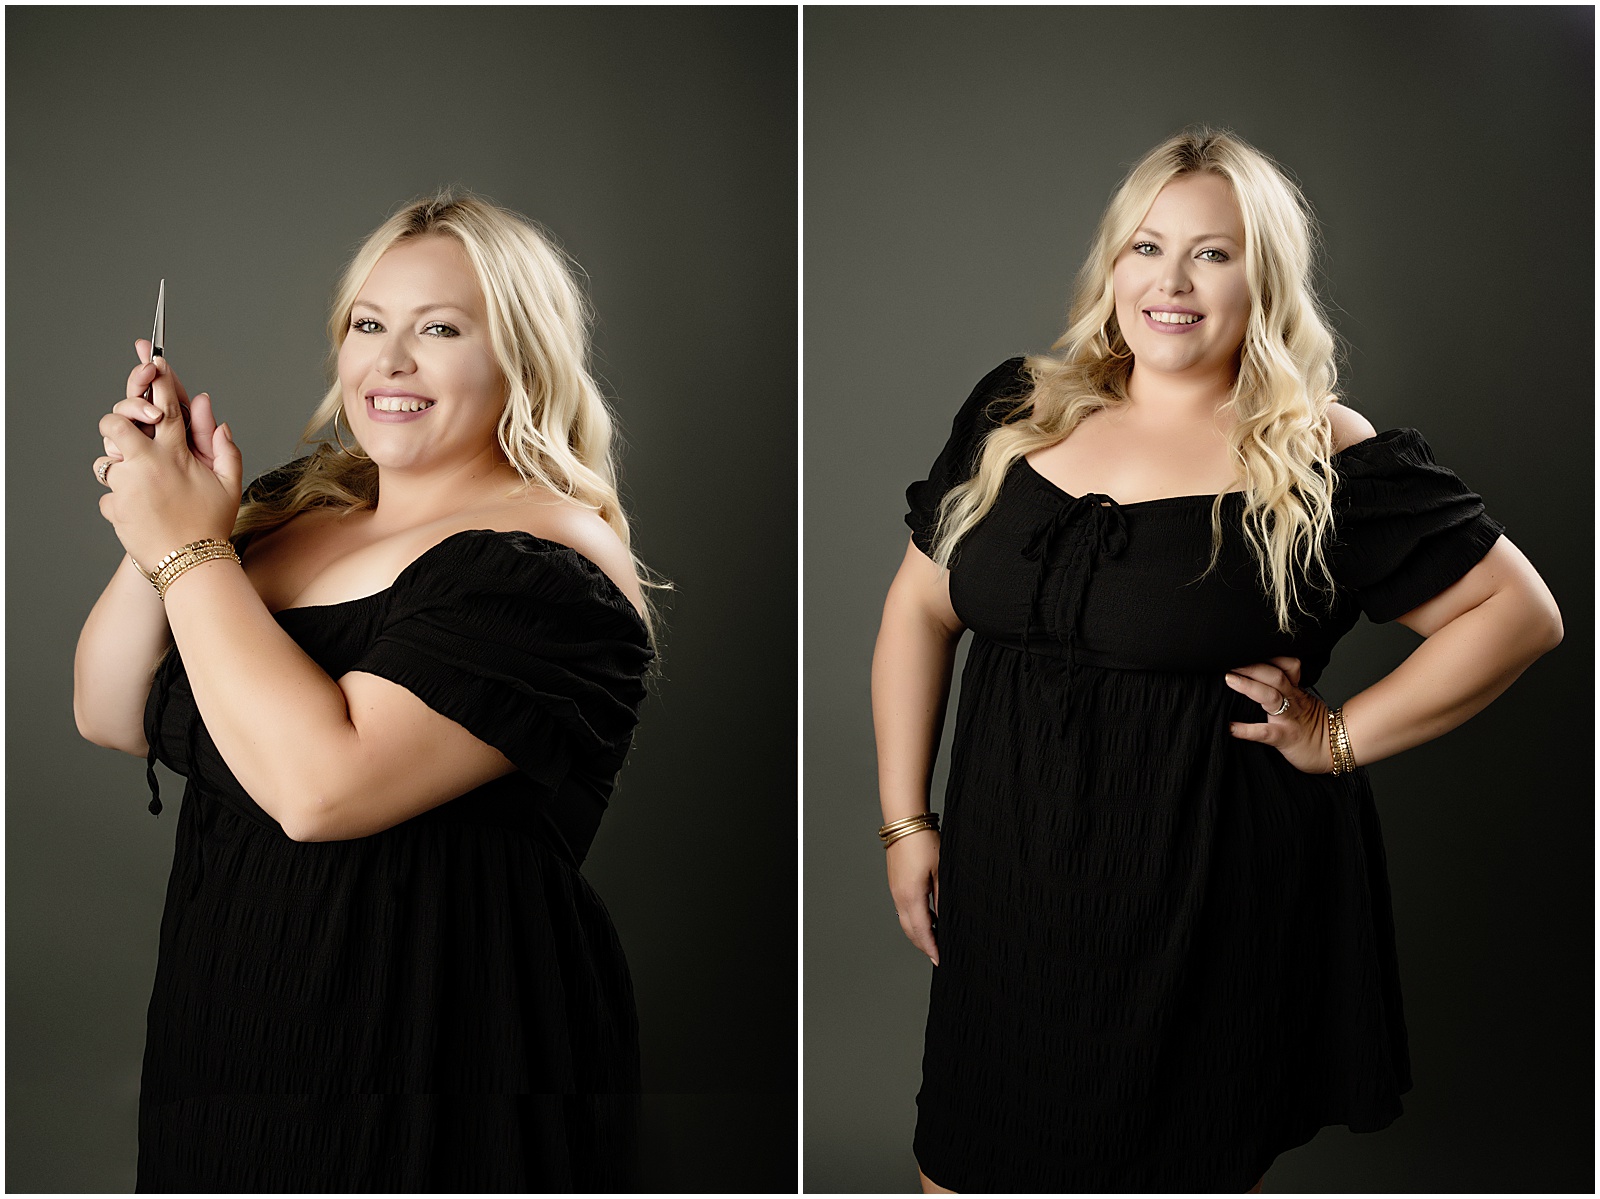 Image of a woman wearing a black dress while holding hair scissors | Professional Headshots by Amanda Ellis Photography